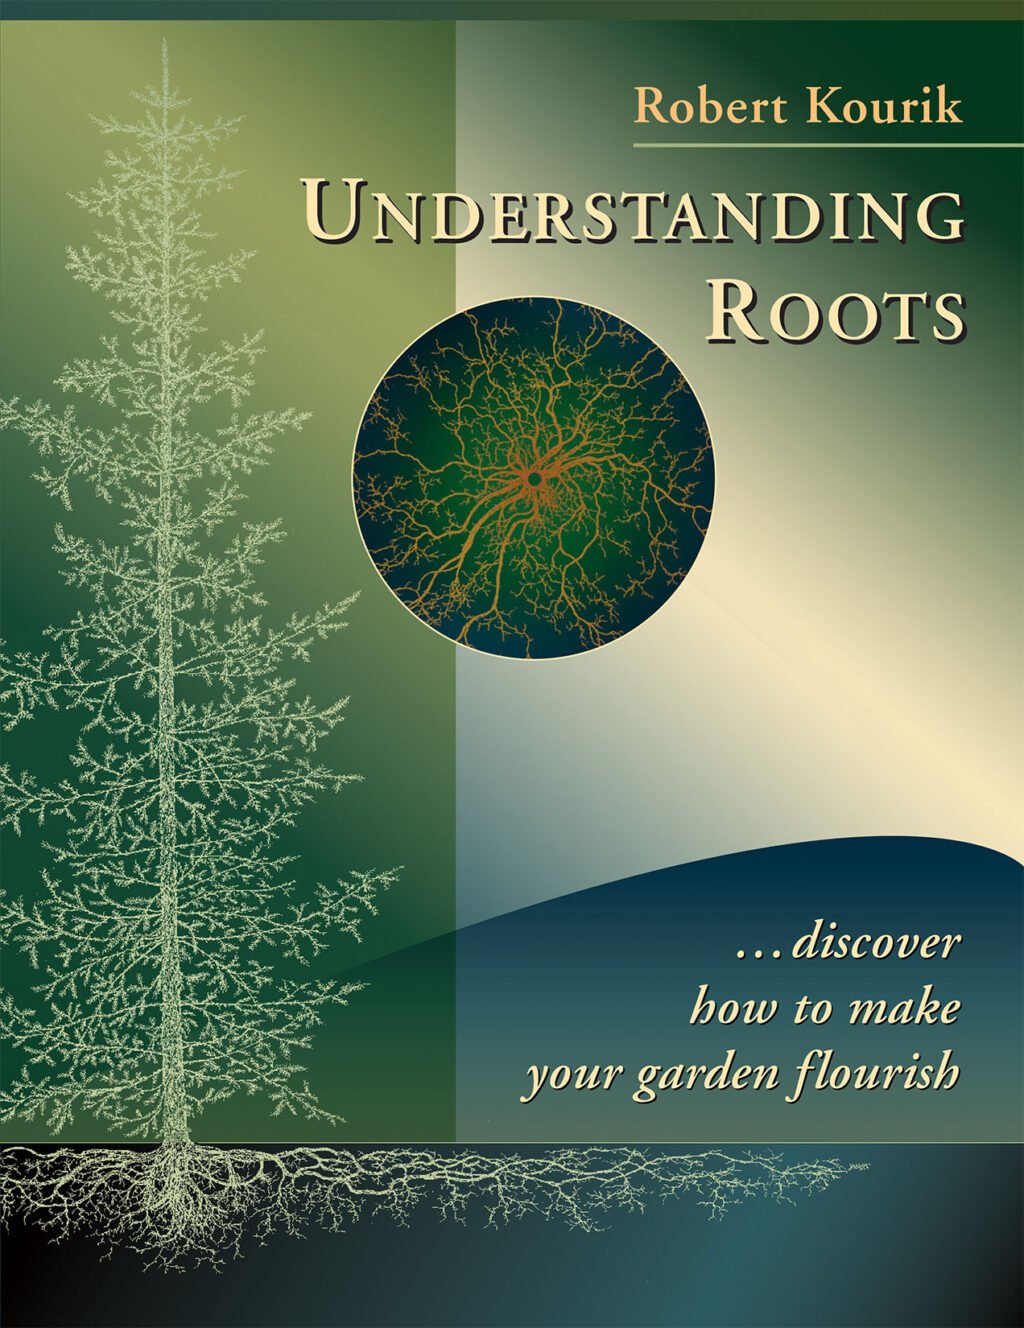 The Understanding Roots cover